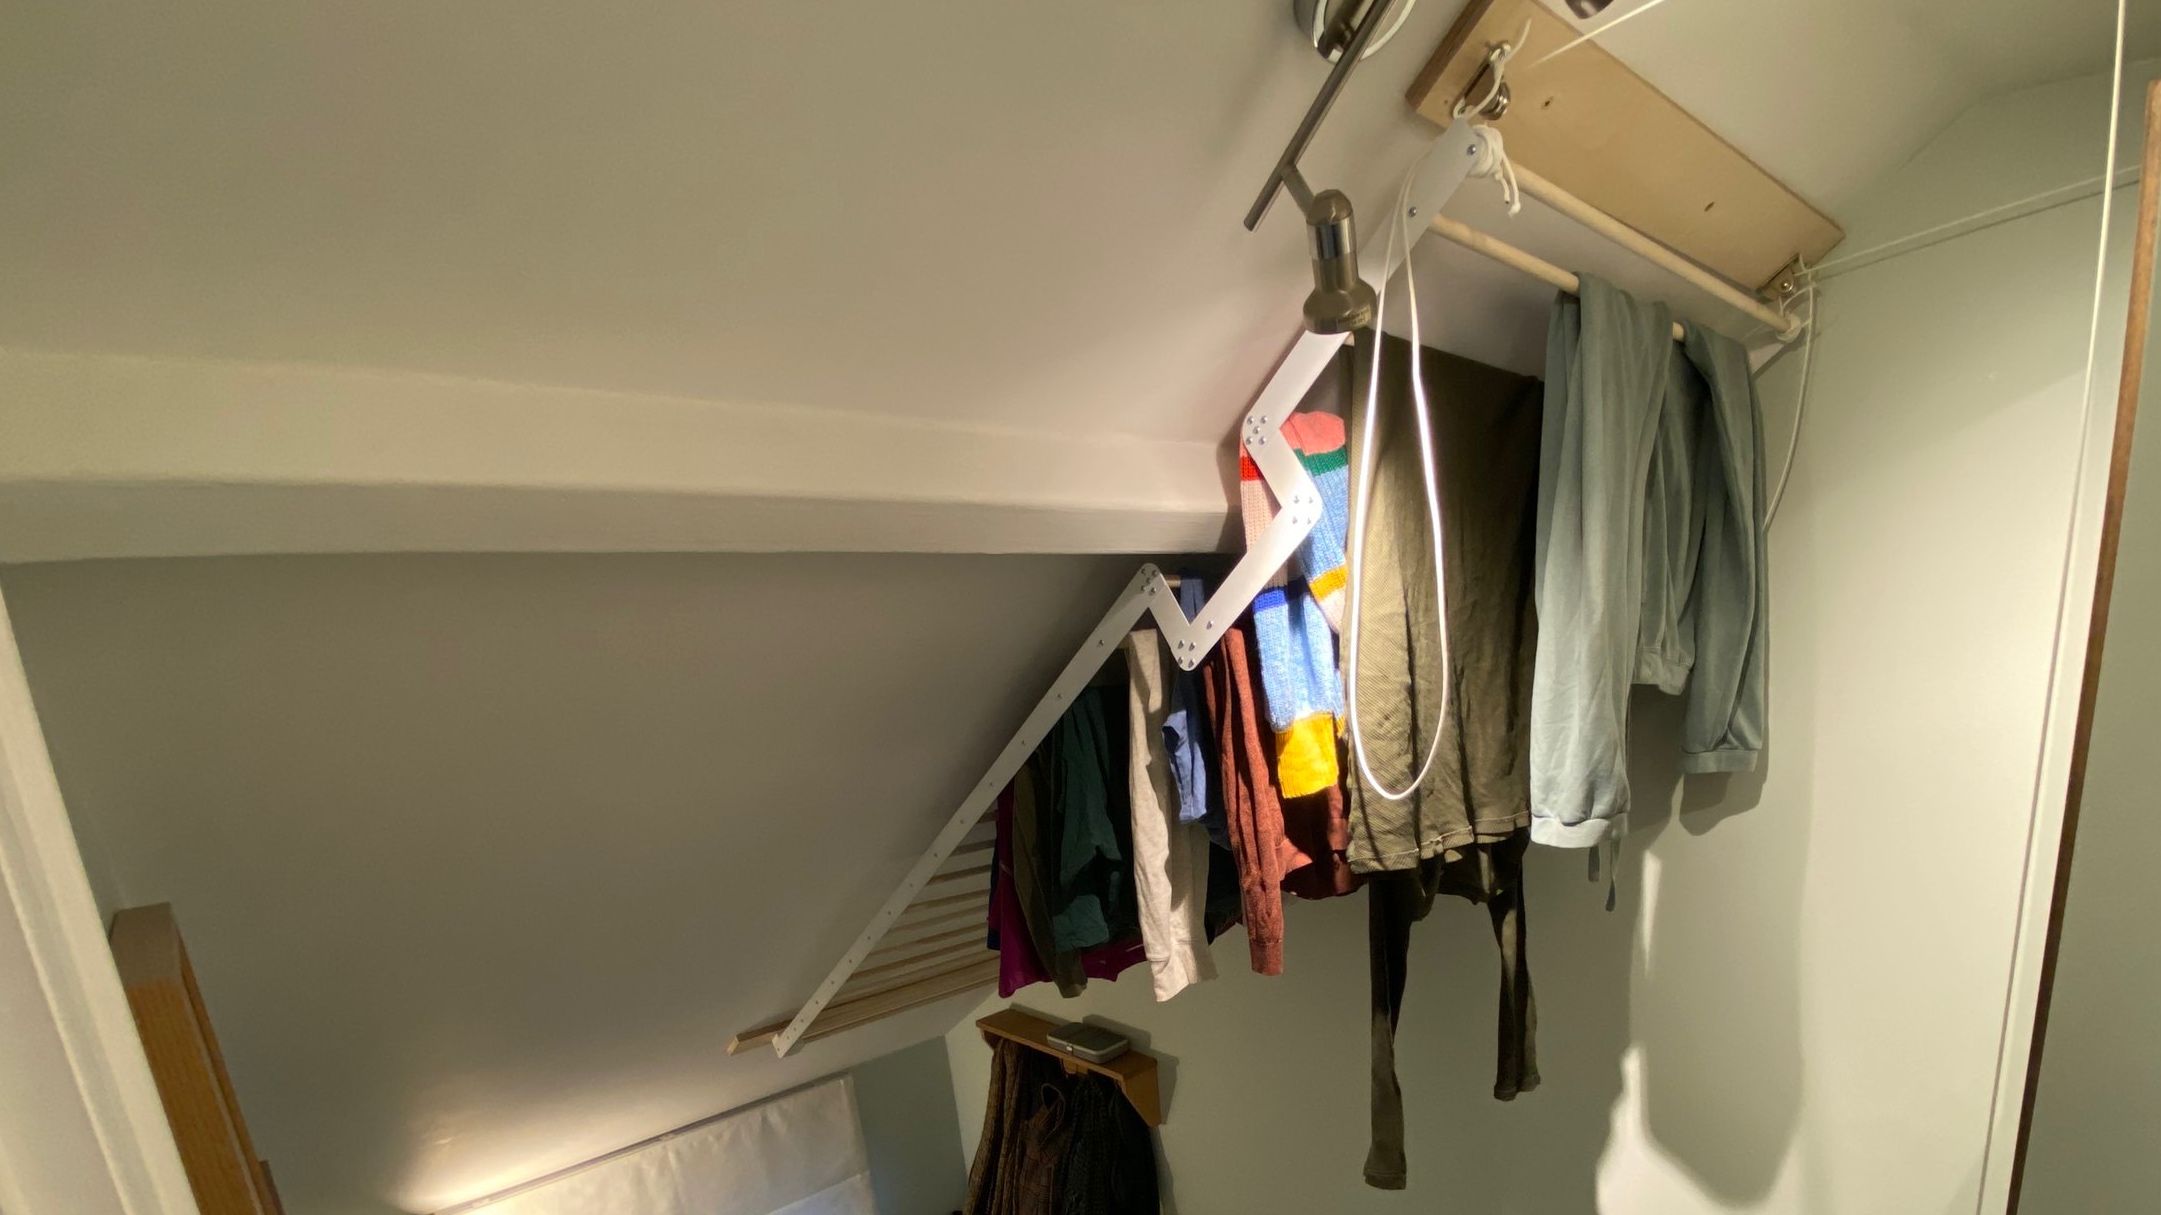 A white stairwell ceiling with a rack holding clothes. The rack follows the slope of the ceiling and is attached to a series of ropes and pulleys to let it got up and down.